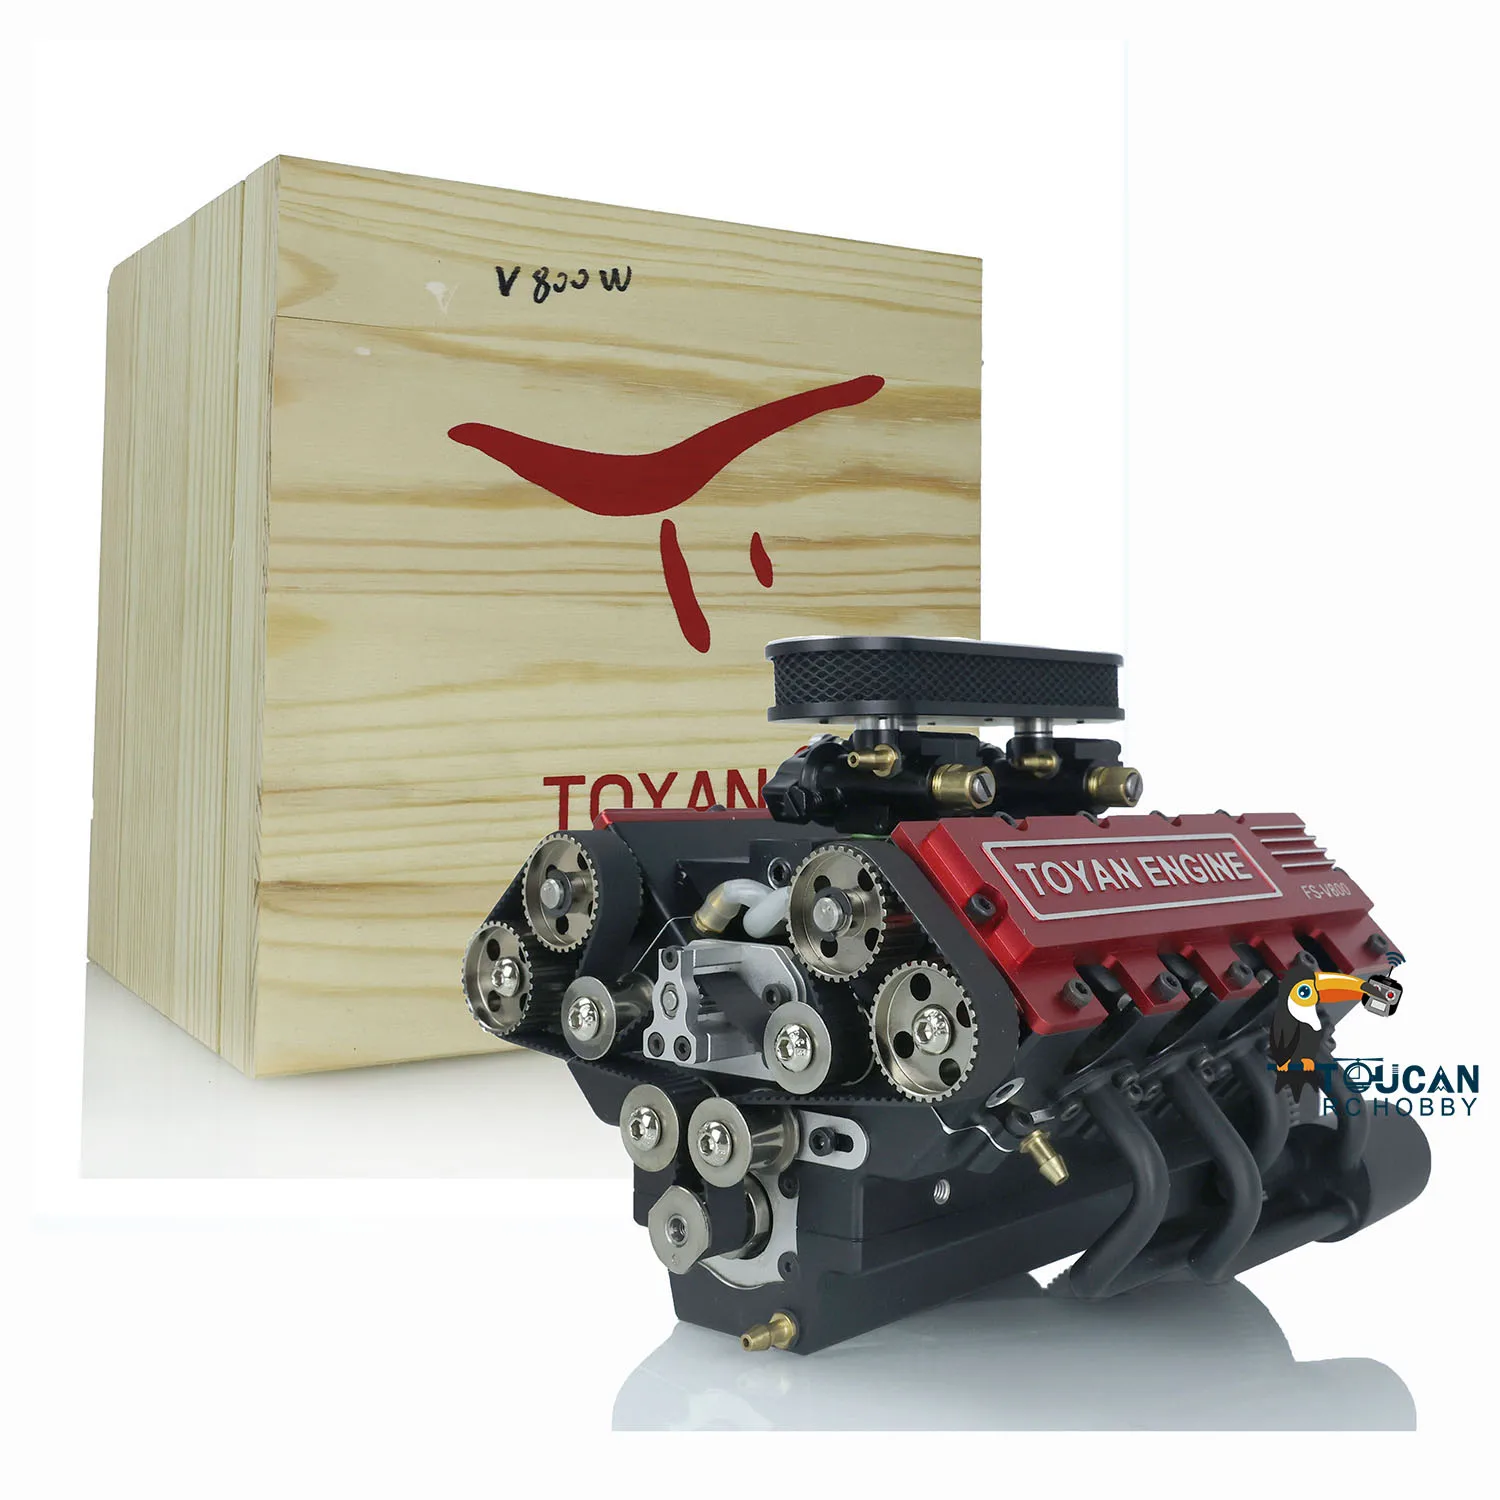 

TOYAN V8 Methanol Metal Engine Model 4 strokes Miniature 8-cylinder Water-cooled Assembled for RC Car Boat Airplane TH21549